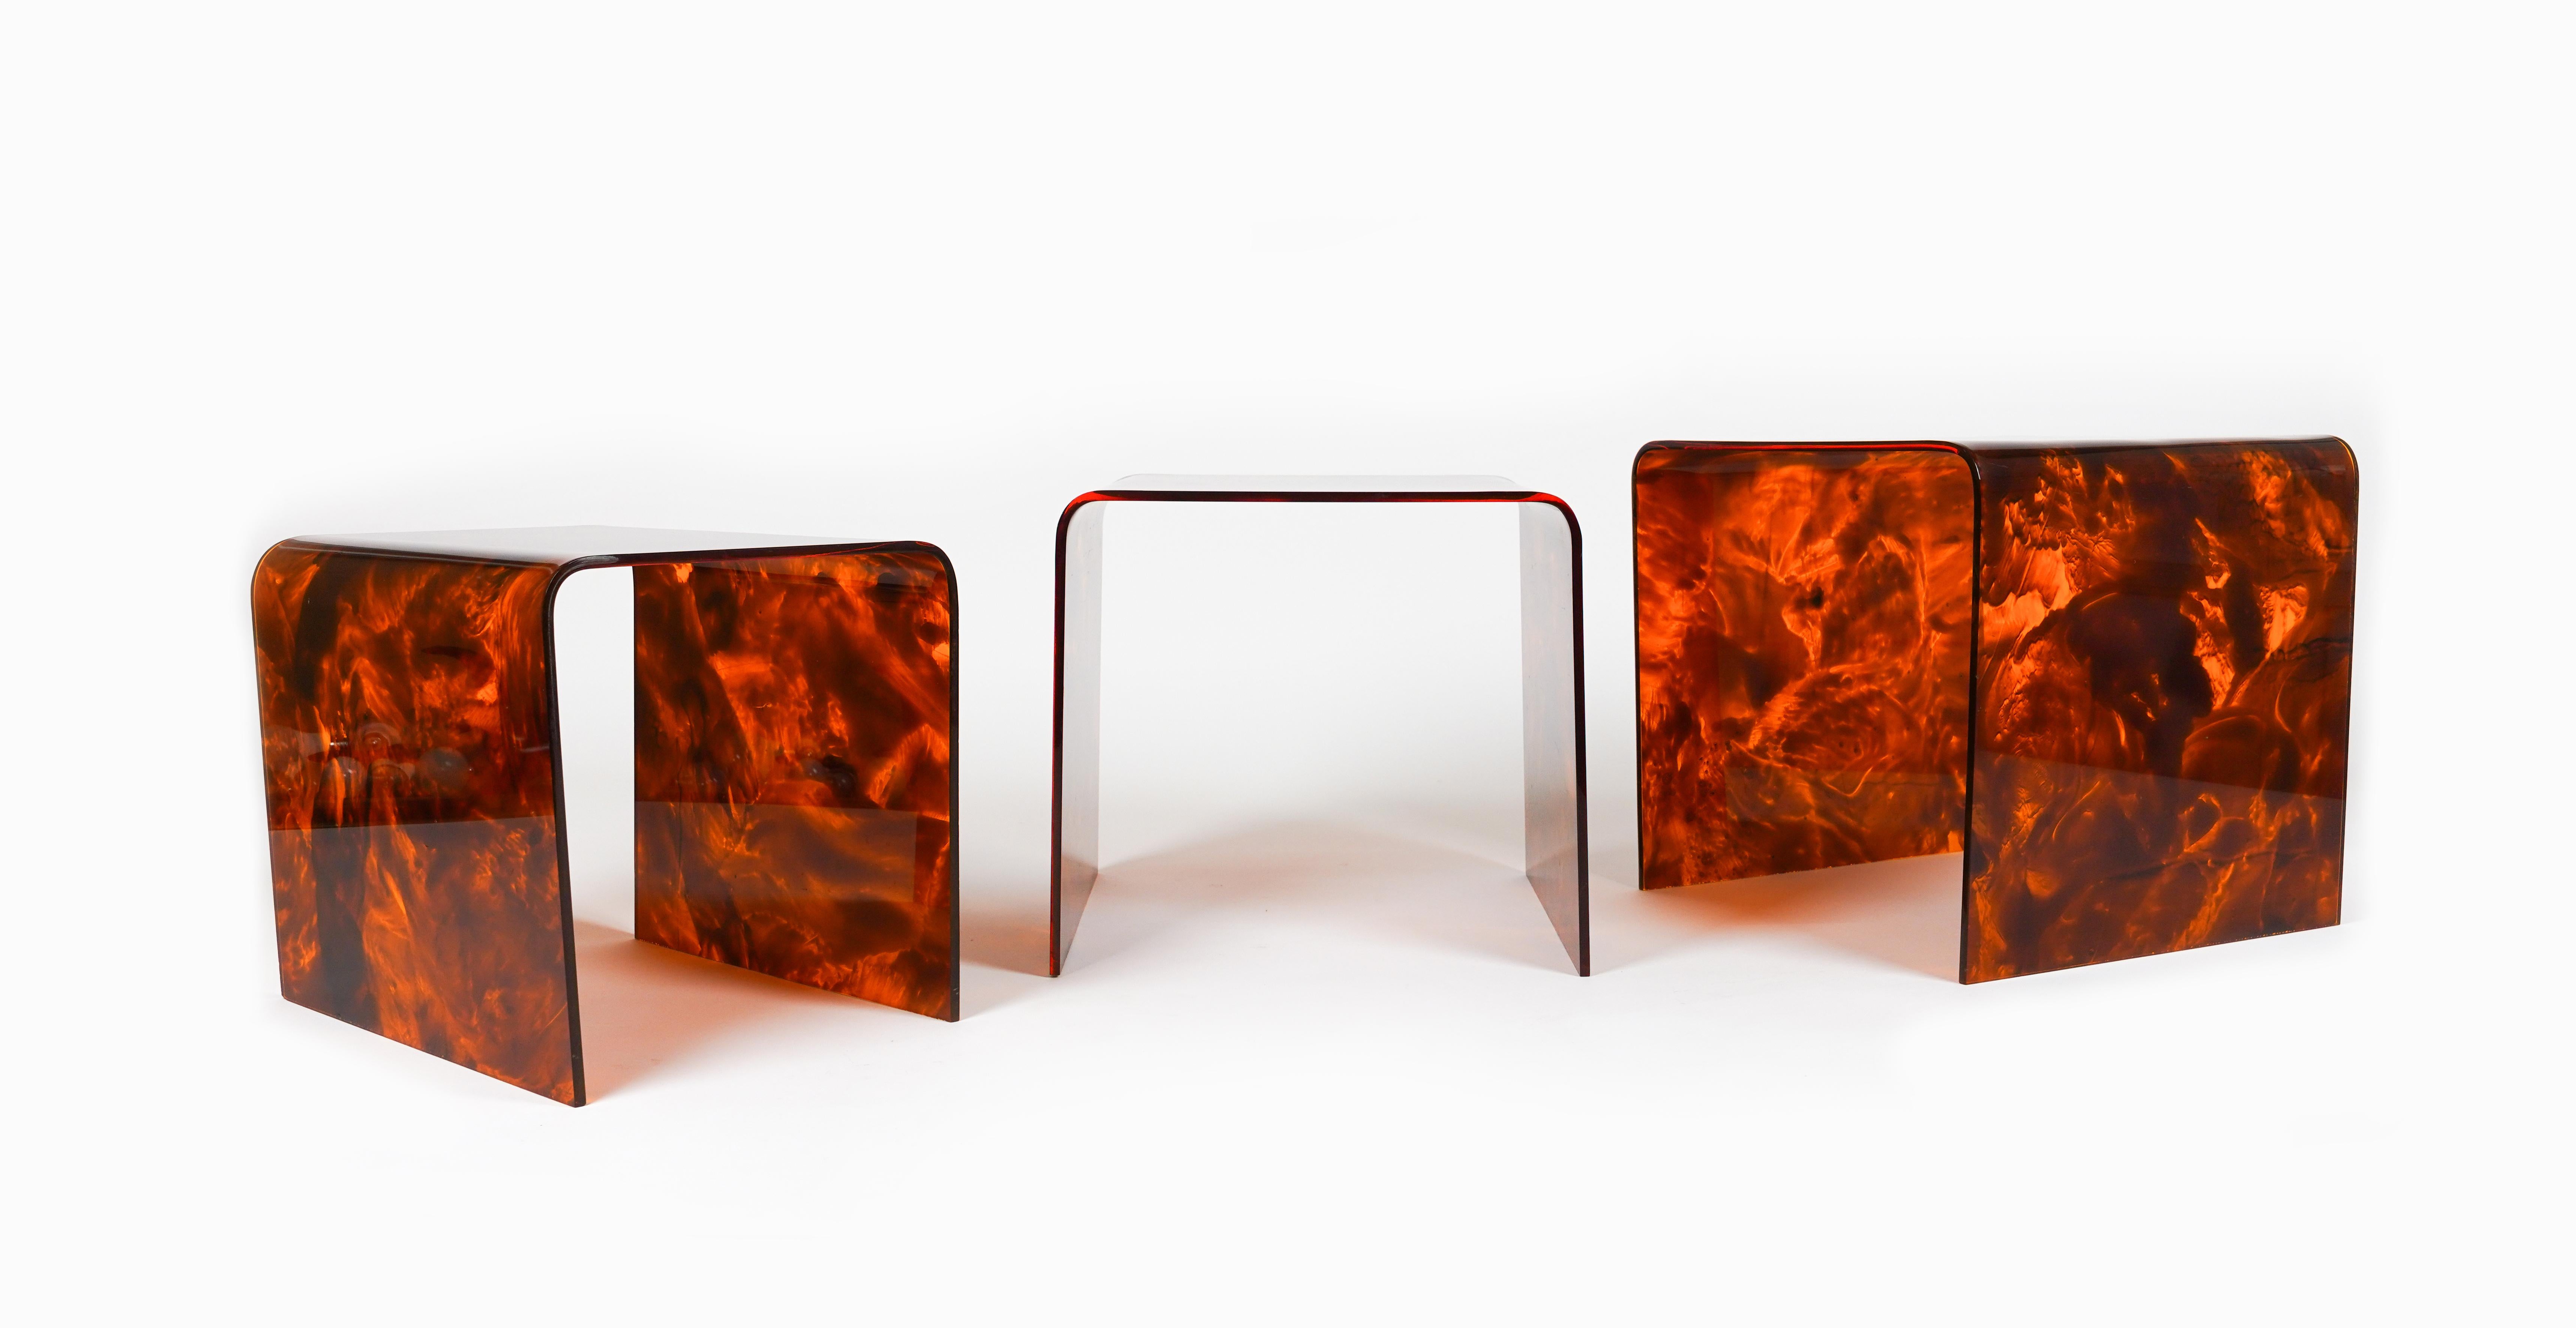 Set of 3 Nesting Tables in Lucite Faux Tortoiseshell Christian Dior, Italy 1970s For Sale 1